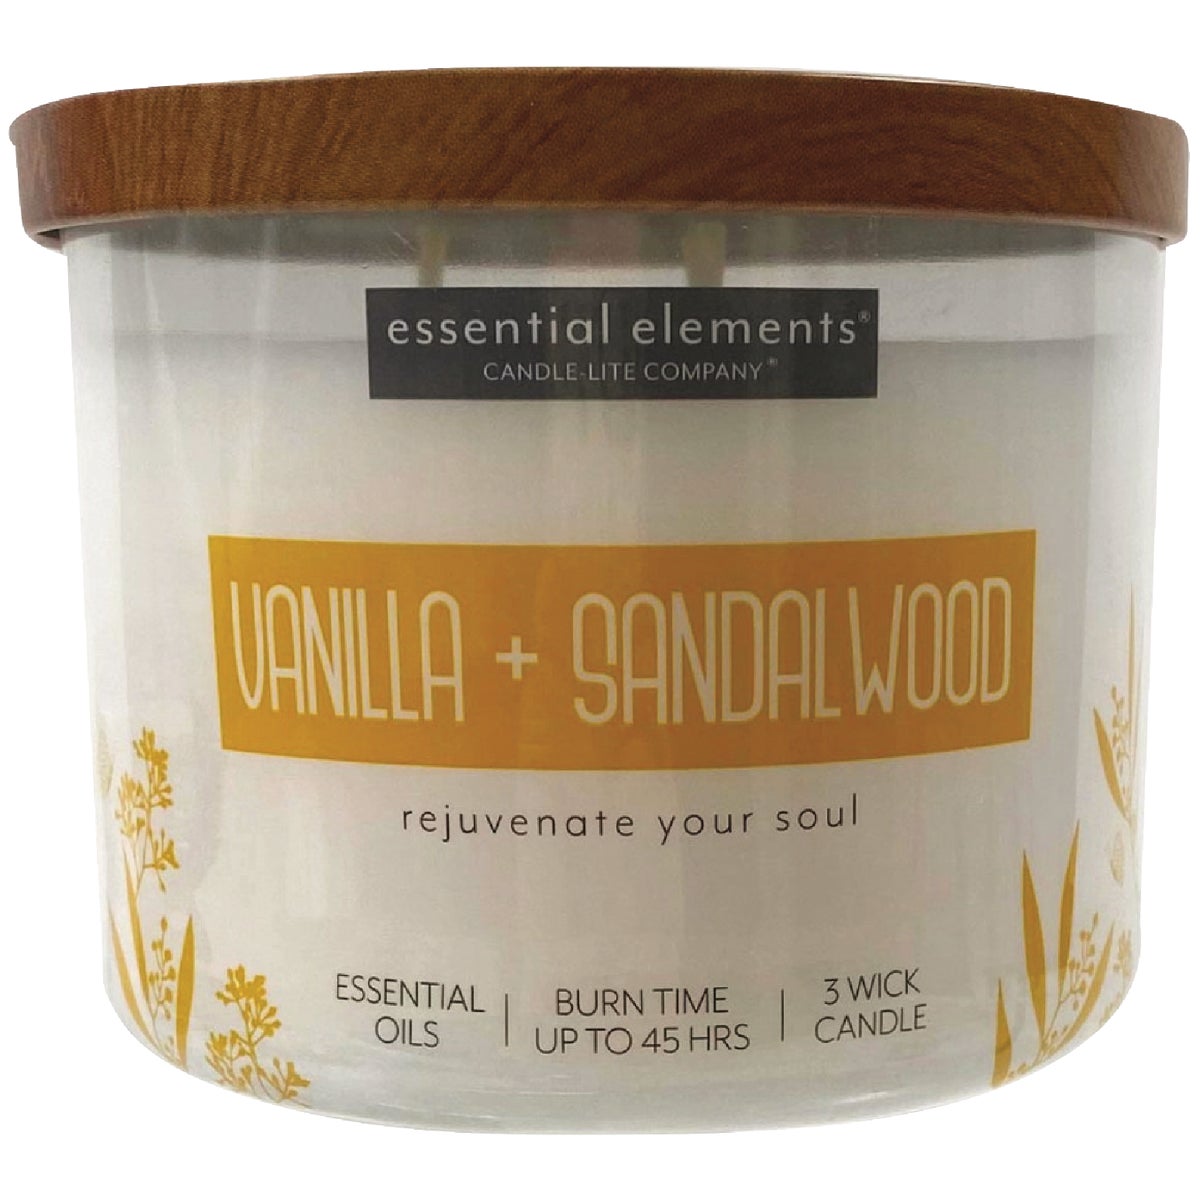 Essential Elements Candle Lite 4574344 Candle Lite Essential Elements 14.75 Oz. Vanilla & Sandalwood Jar Candle with Lid 4574344